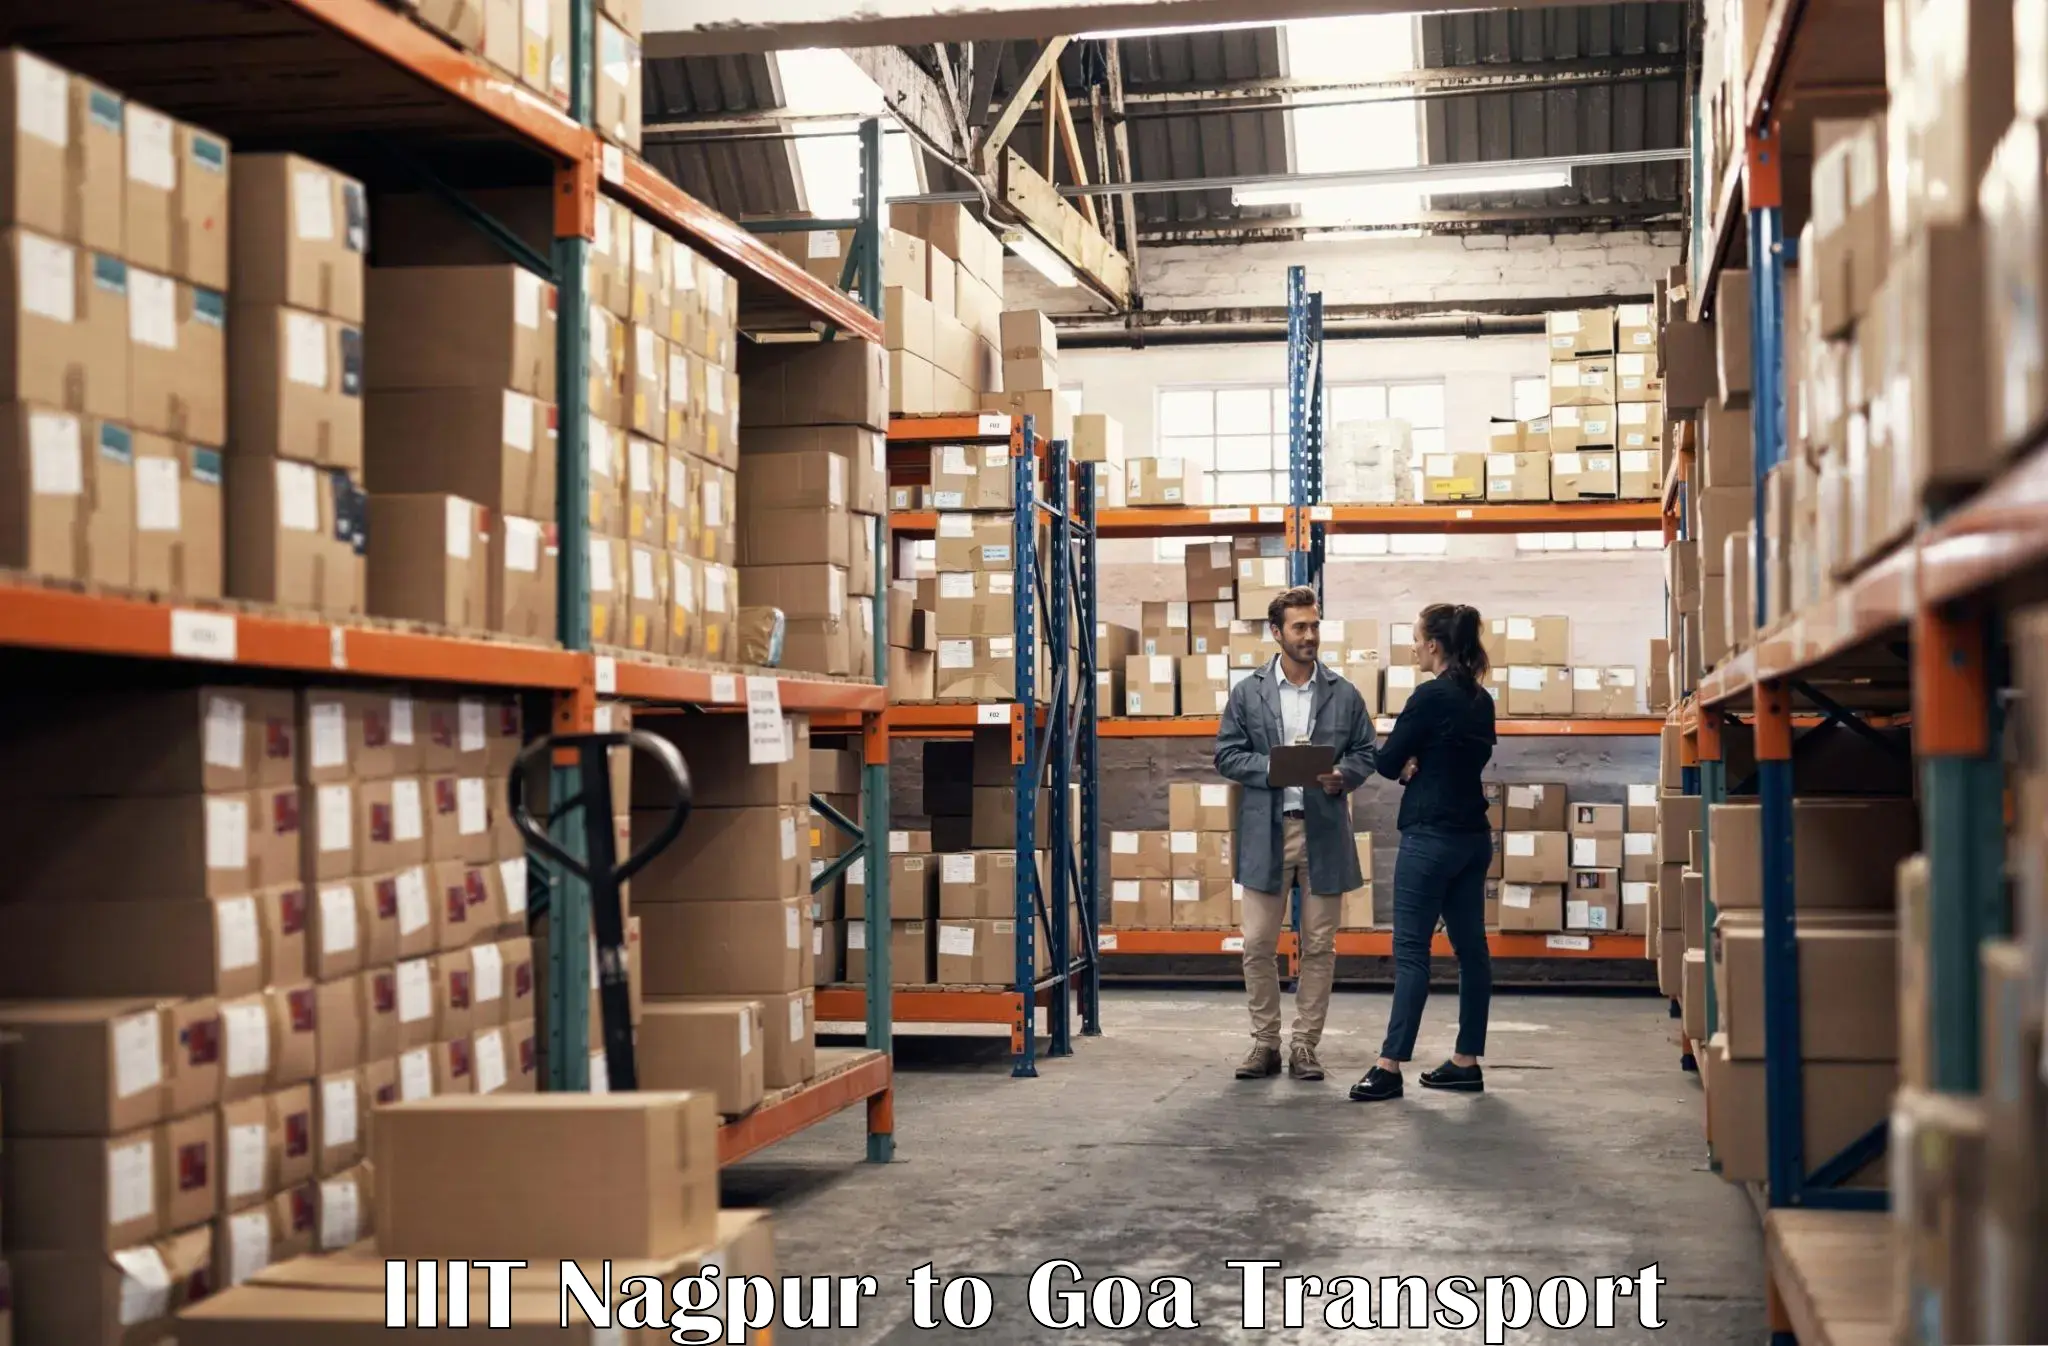 Container transport service IIIT Nagpur to Goa